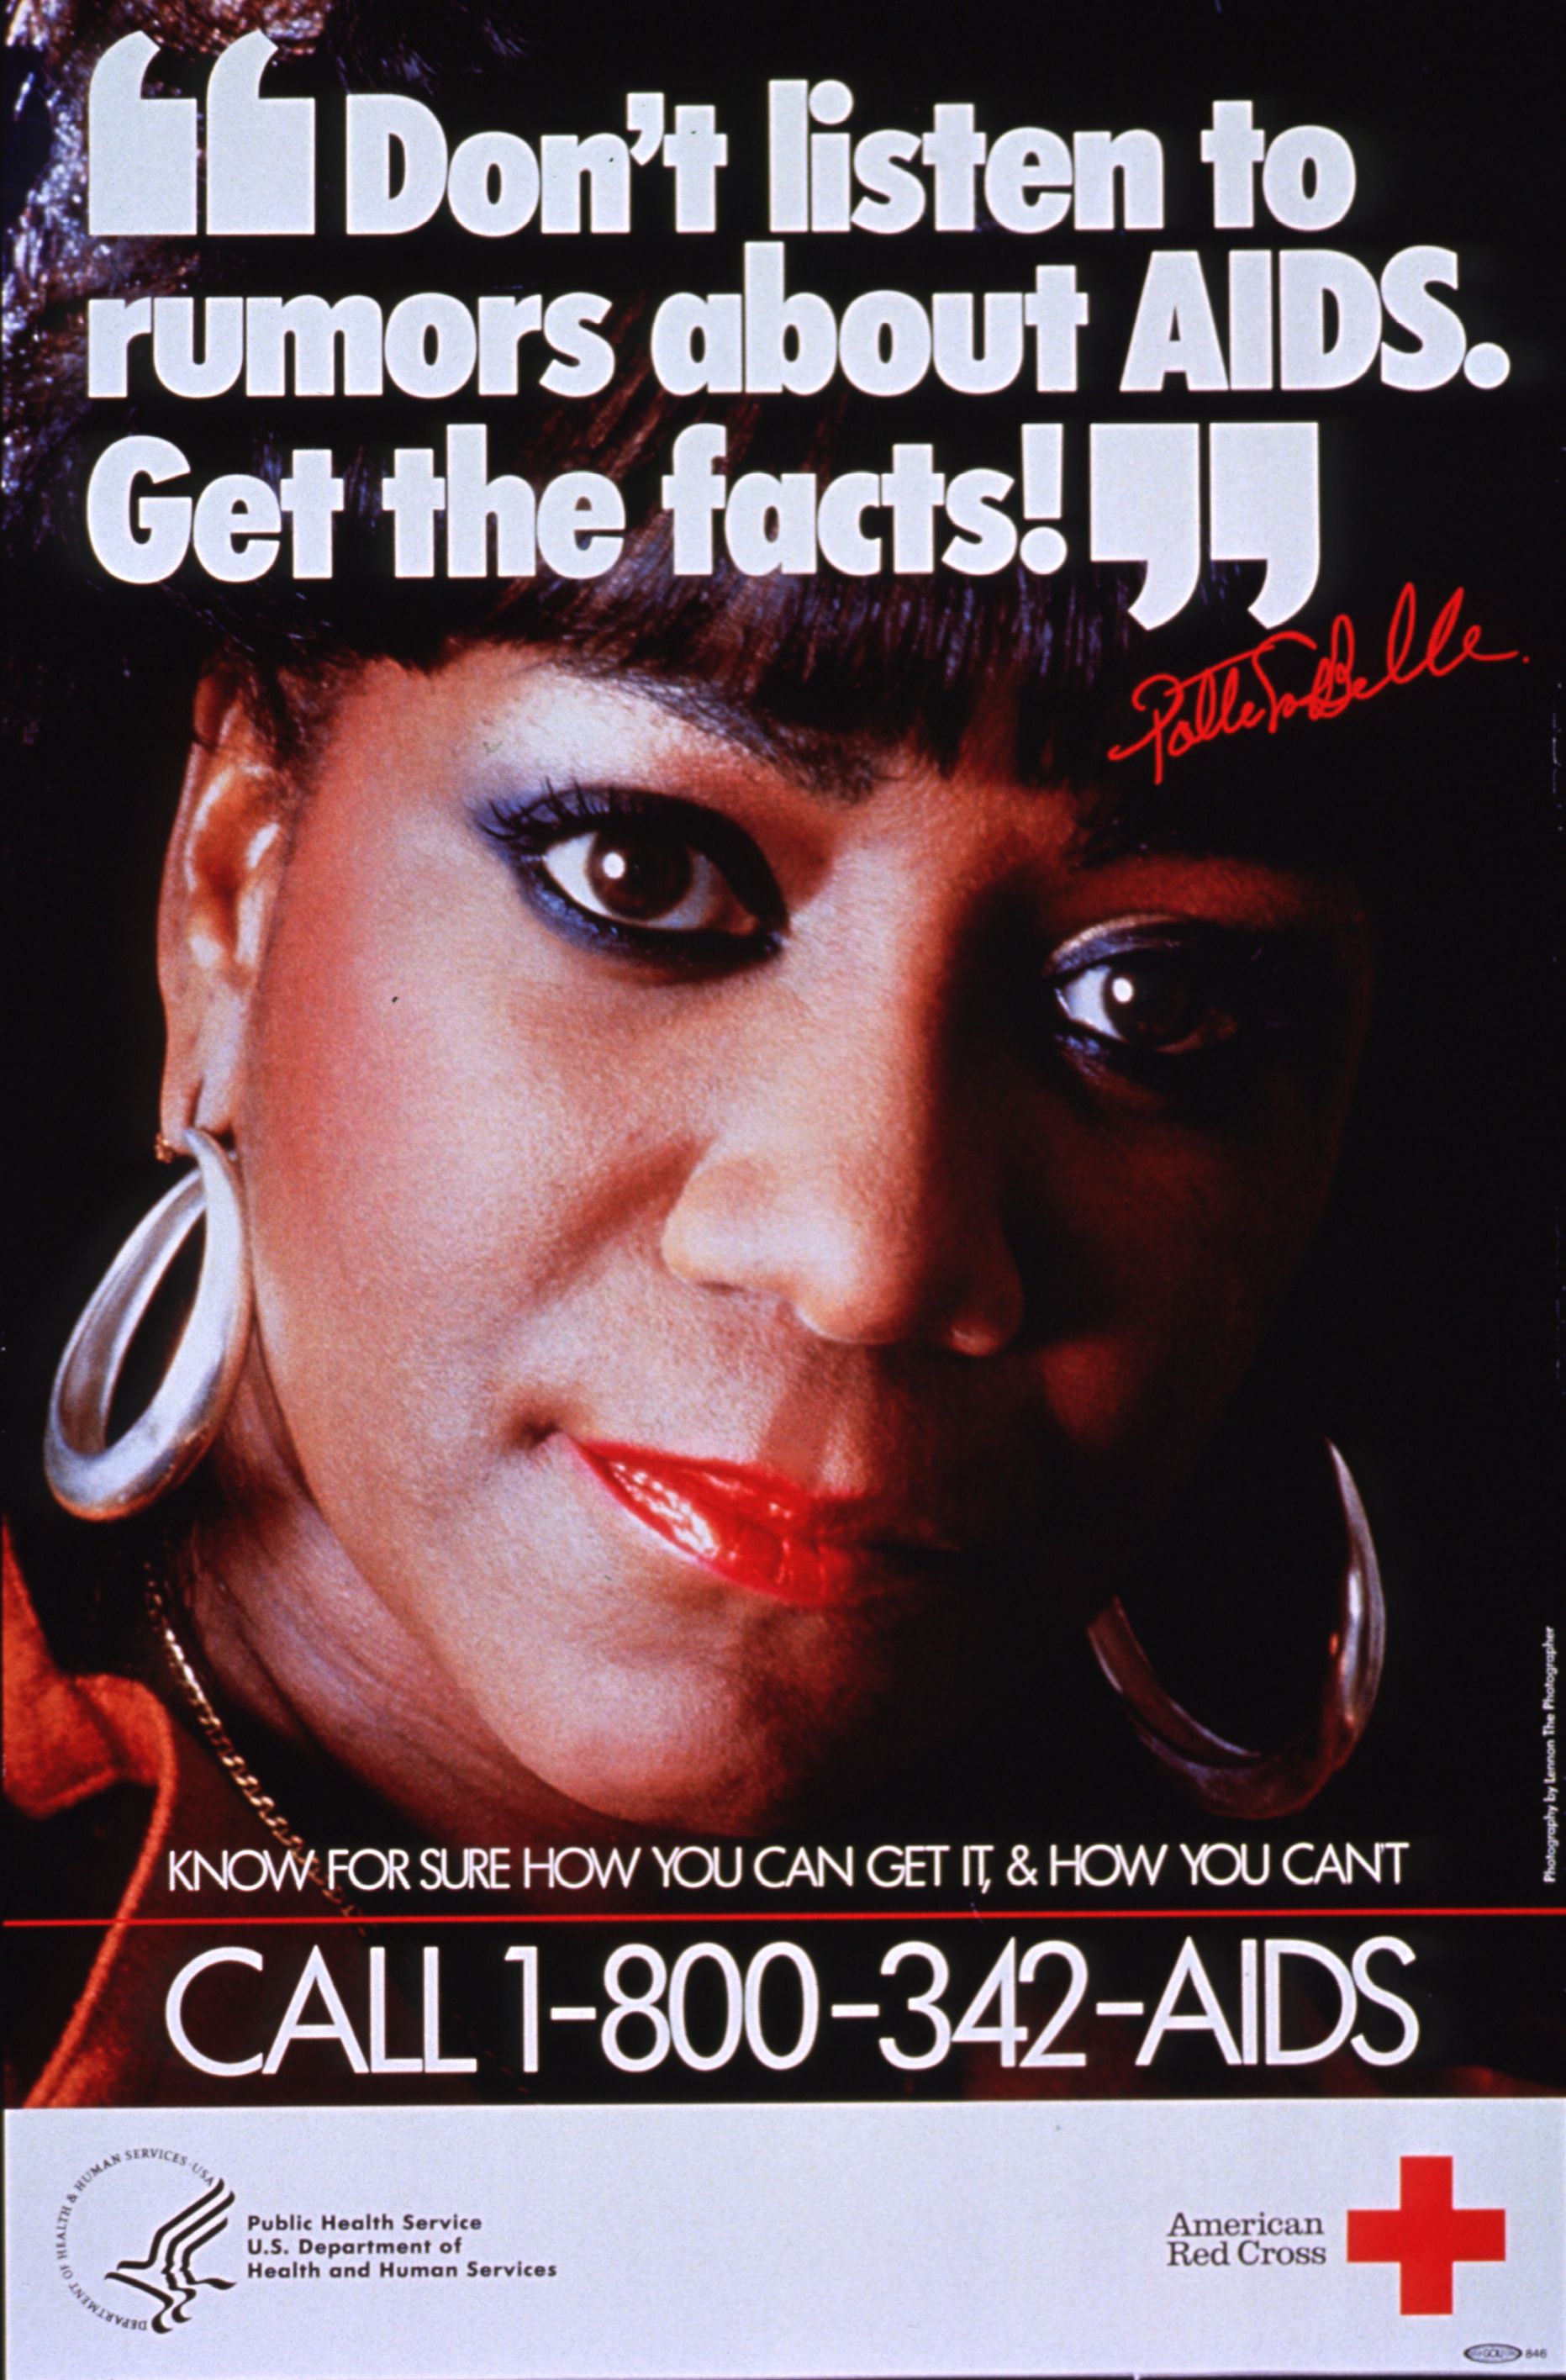 Public health poster featuring a quote by patti labelle discouraging aids rumors and promoting factual information, with contact information for the american red cross and a hotline number.